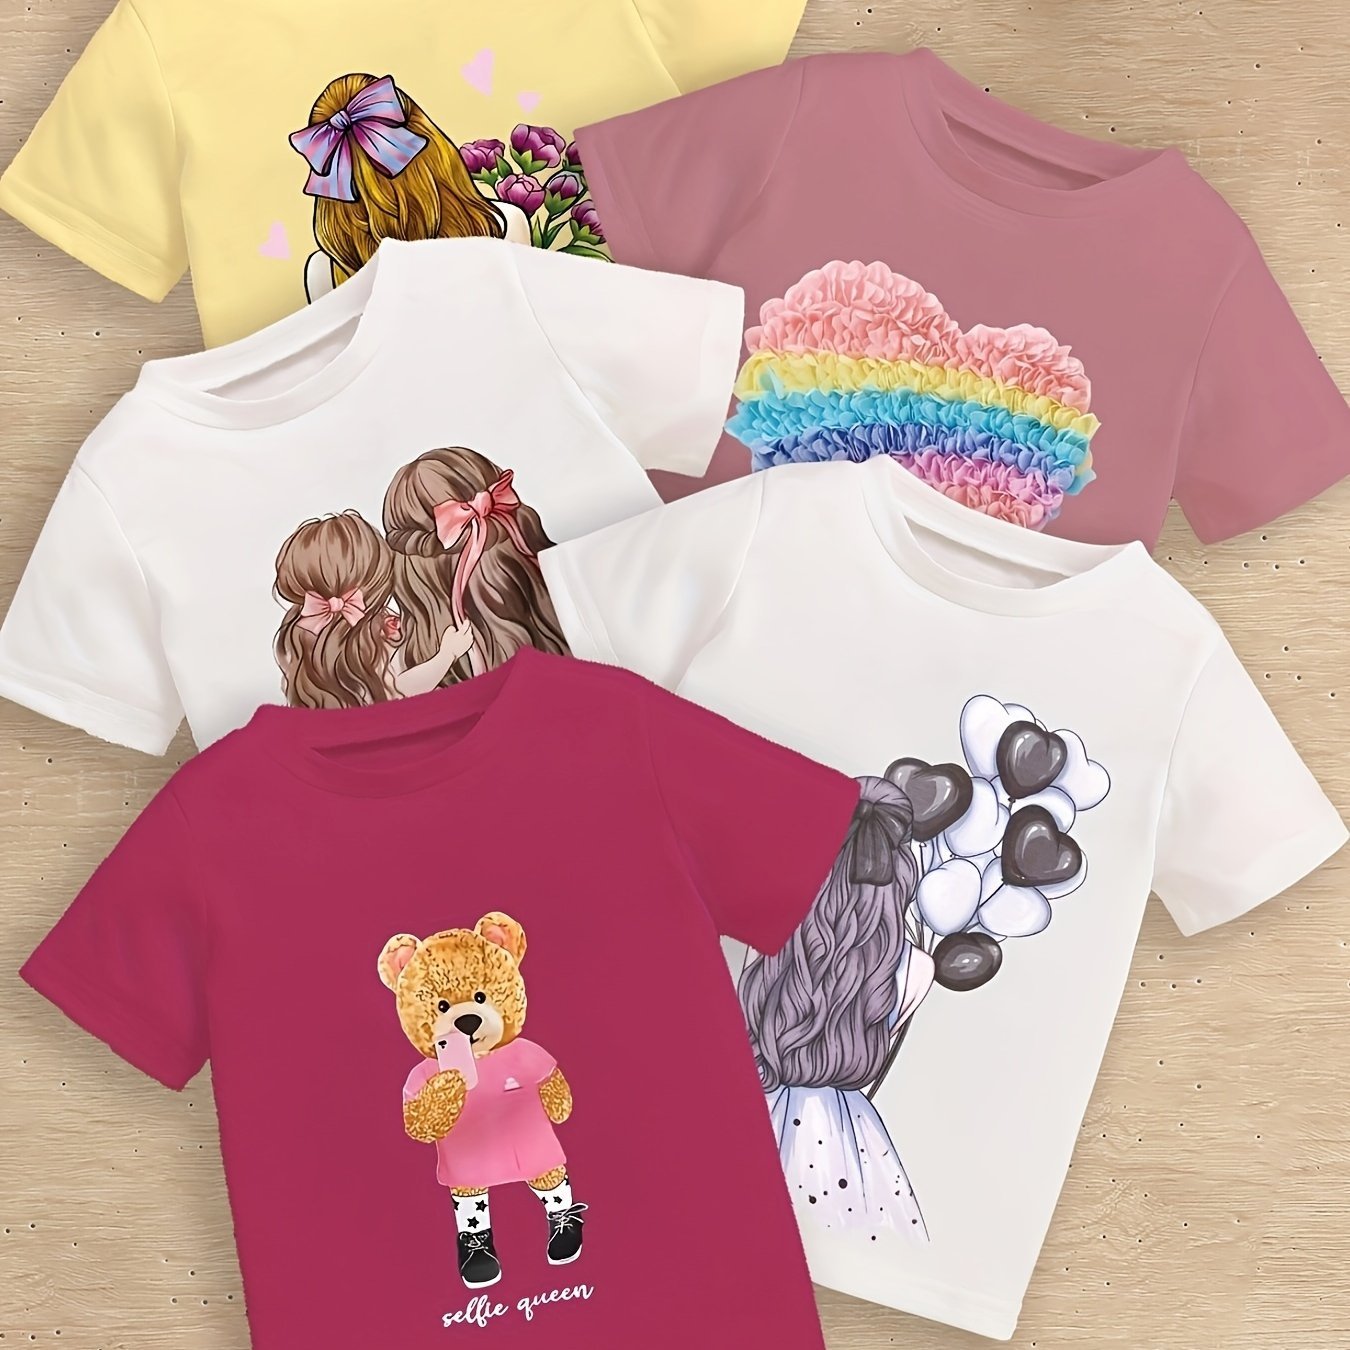 Adorable 5pcs Toddler T - Shirt Set - Playful Bear/Girl/Heart Designs, Soft Cotton, Short Sleeves - Casual Wear for Baby Girls - Ammpoure Wellbeing